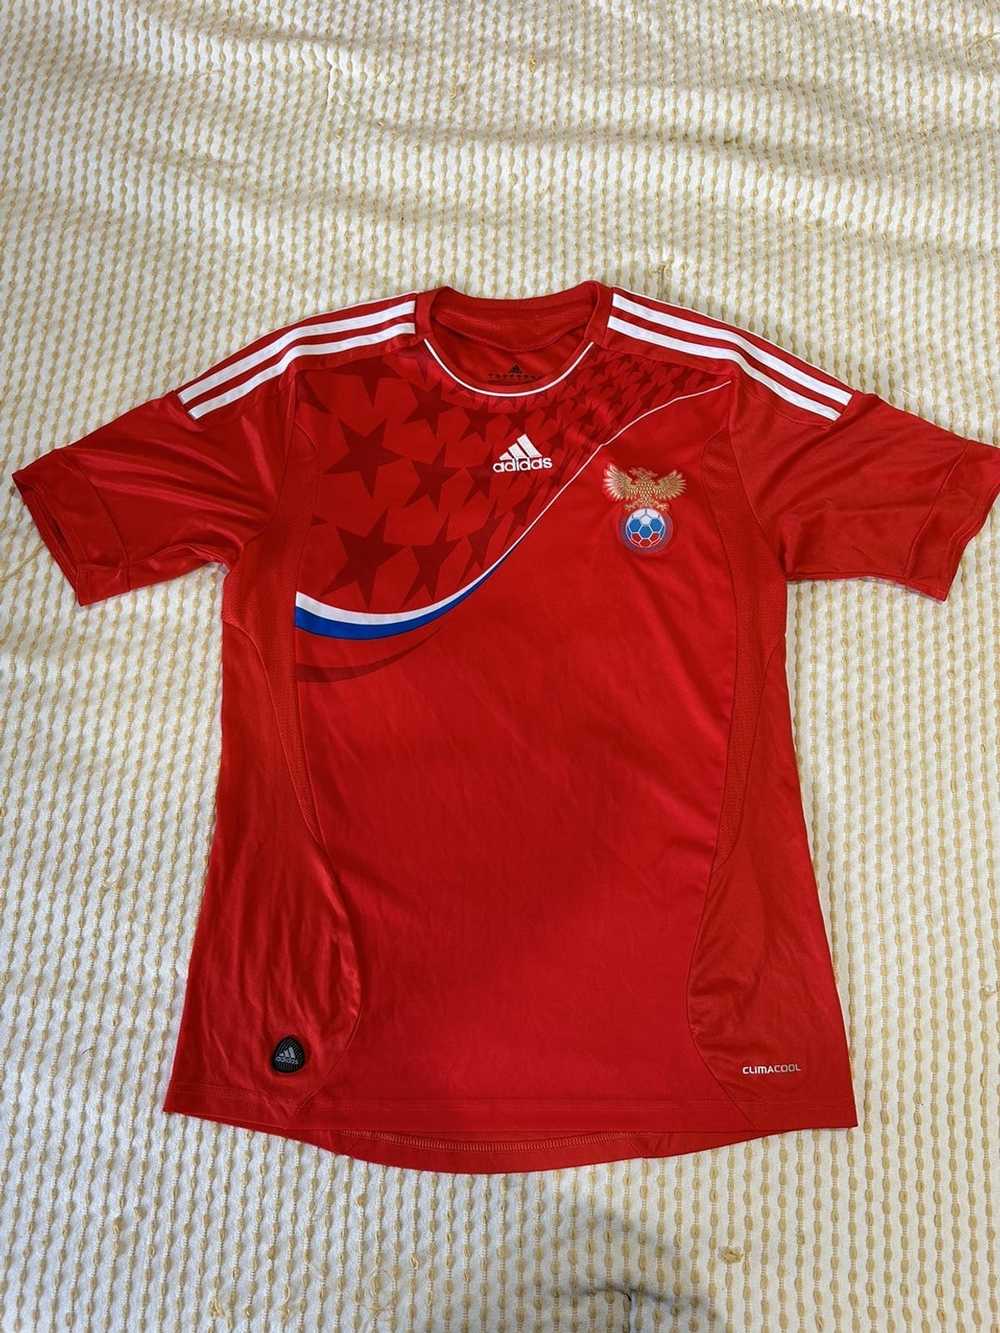 Adidas Vintage Soccer Jersey - Russia - image 1